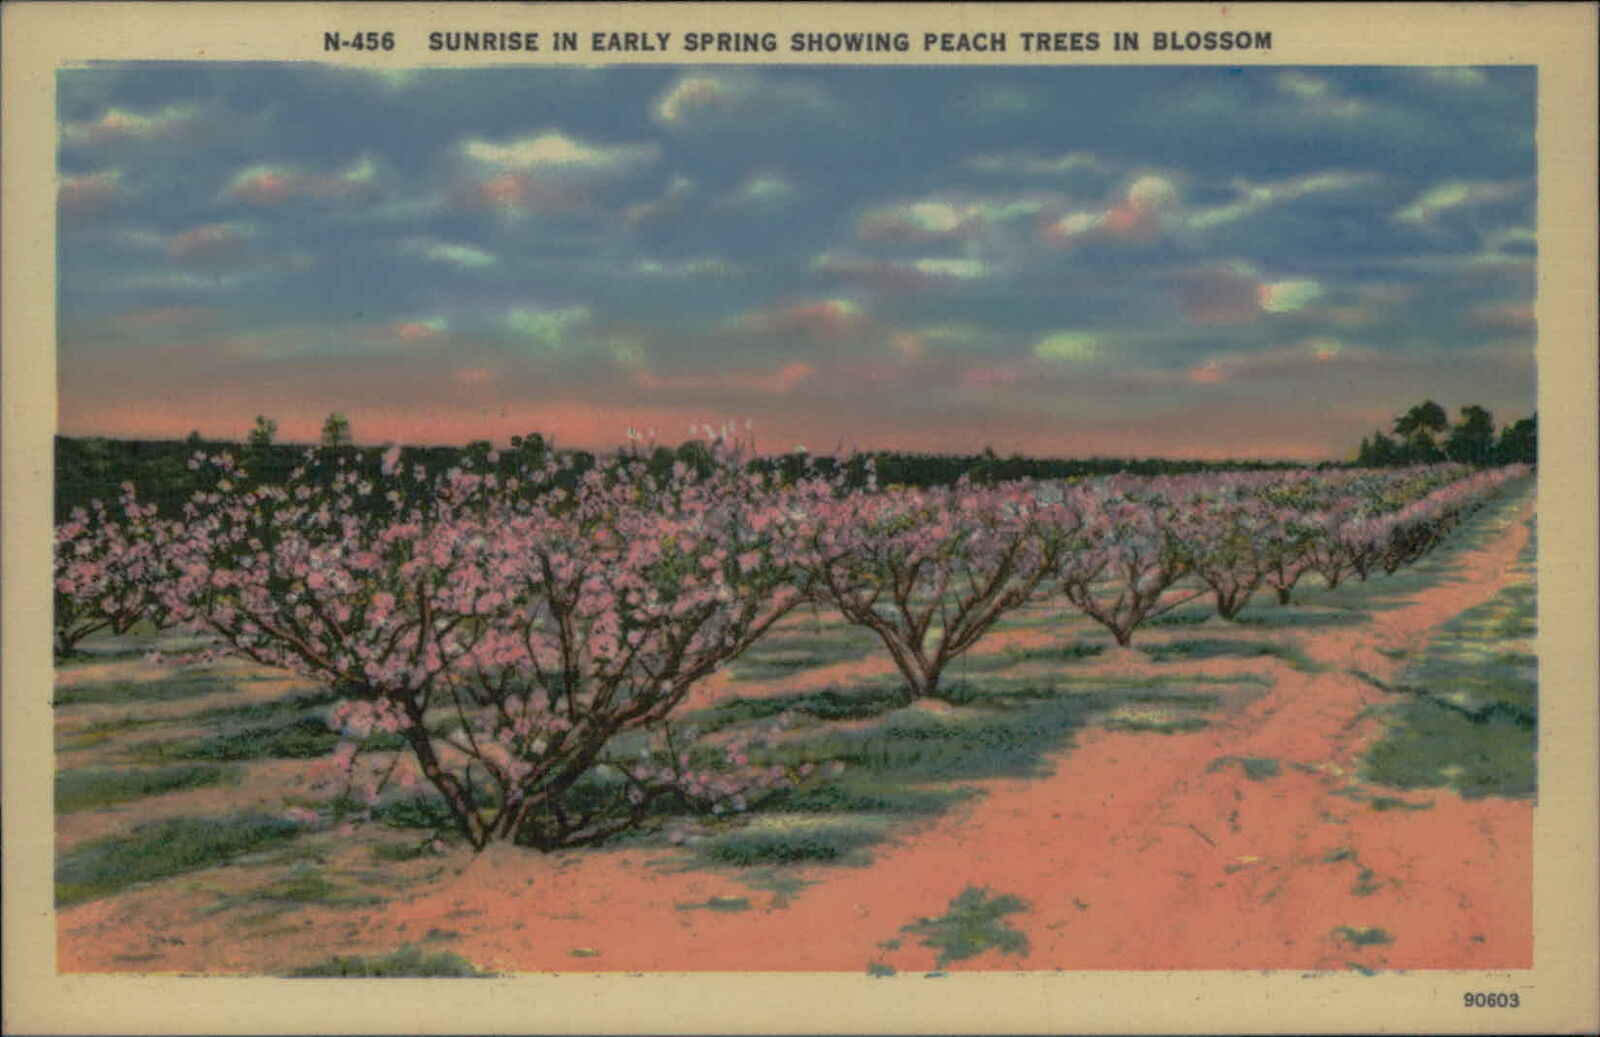 Postcard: N-456 SUNRISE IN EARLY SPRING SHOWING PEACH TREES IN BLOSSOM